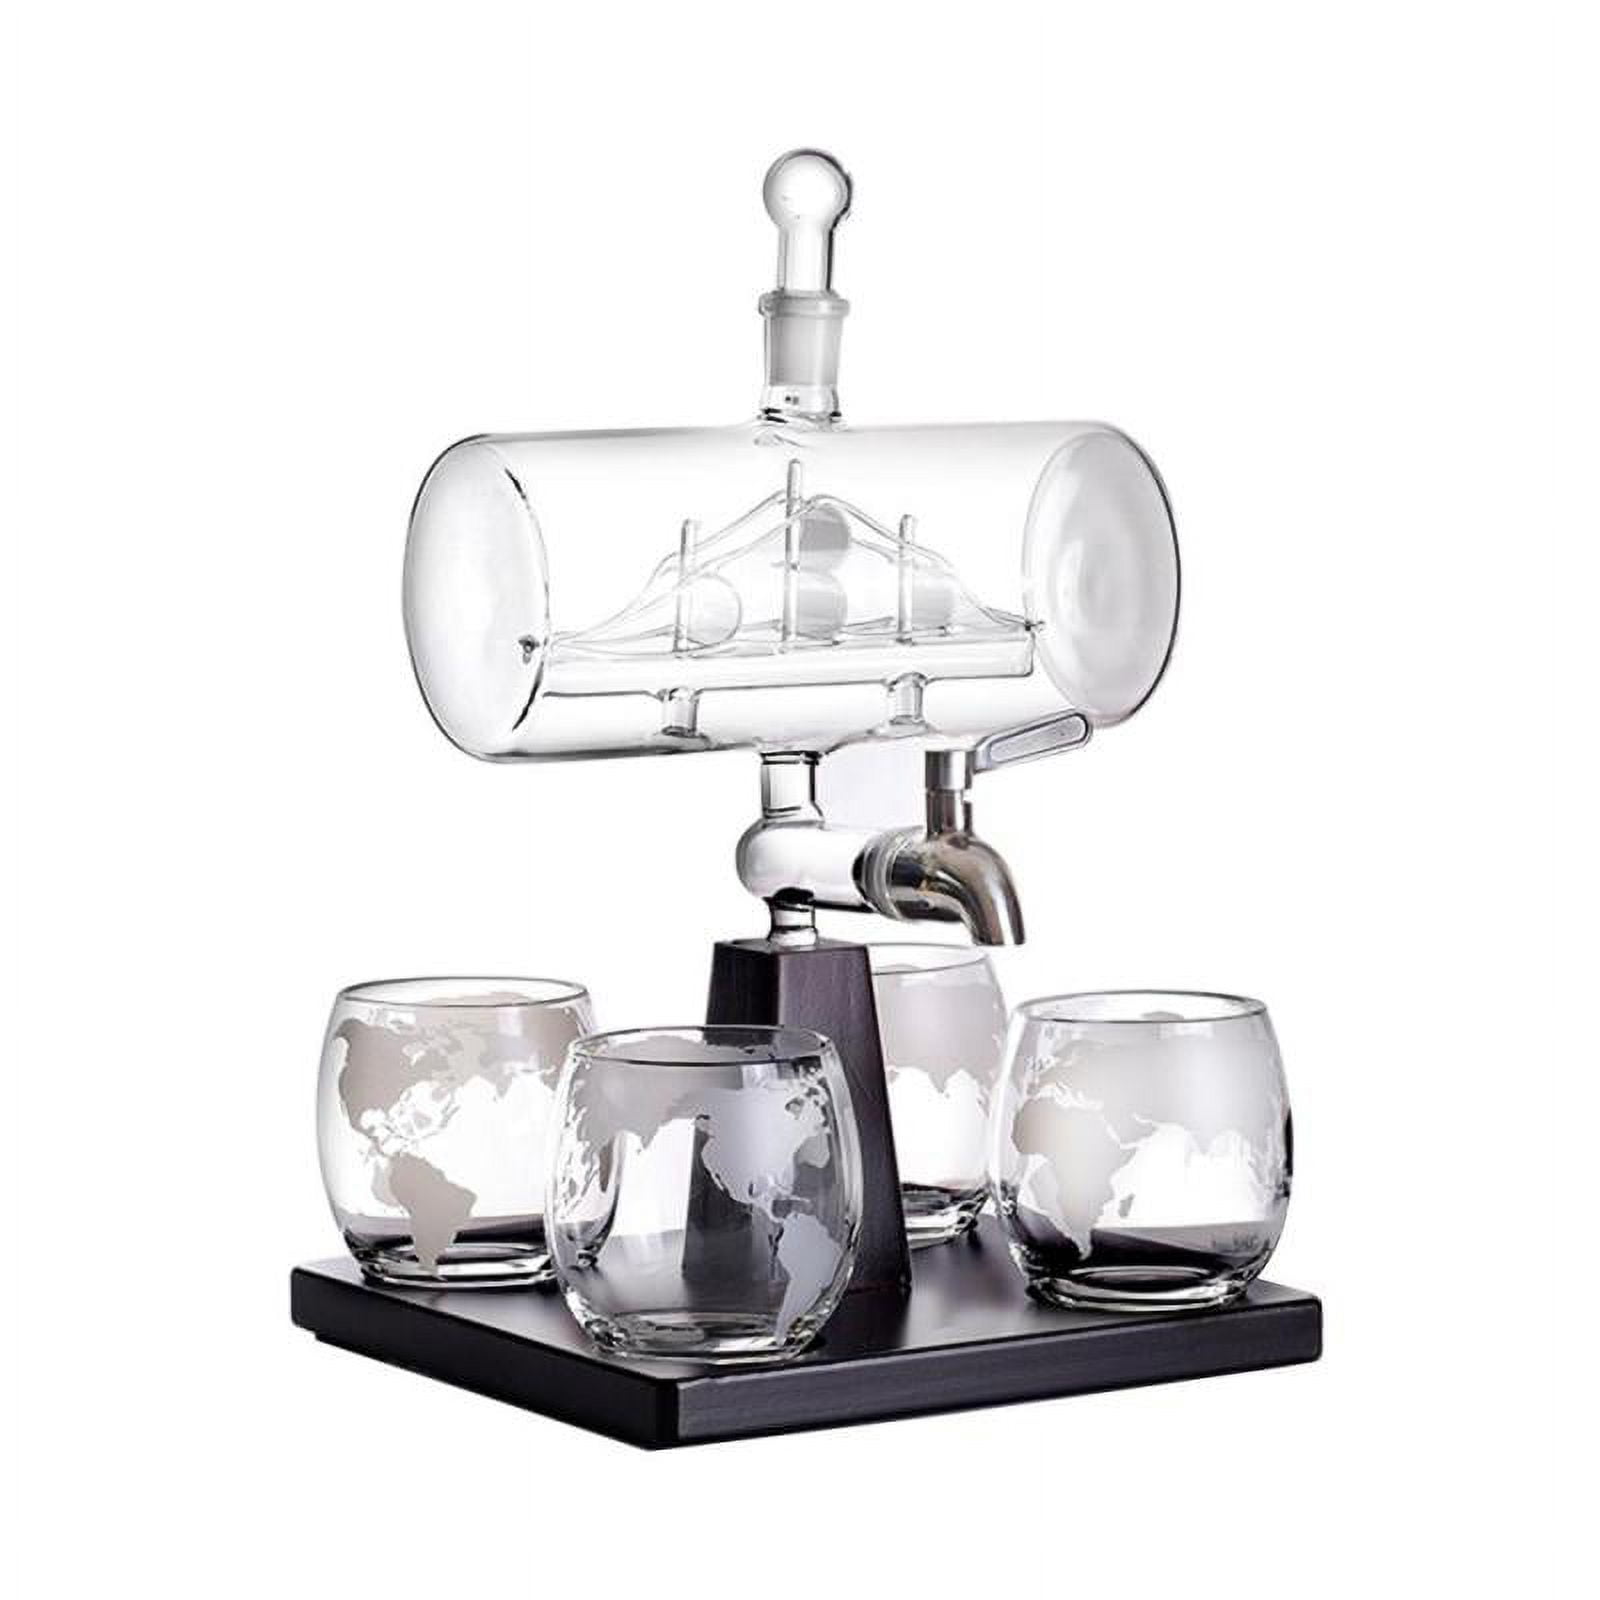 Whiskey & Wine Decanter Gifts for Men & Dad, Ship Decanter 1000ml, Set with  4 Globe Drinking Glasses - Cool Liquor Dispenser for Home Bar Unique